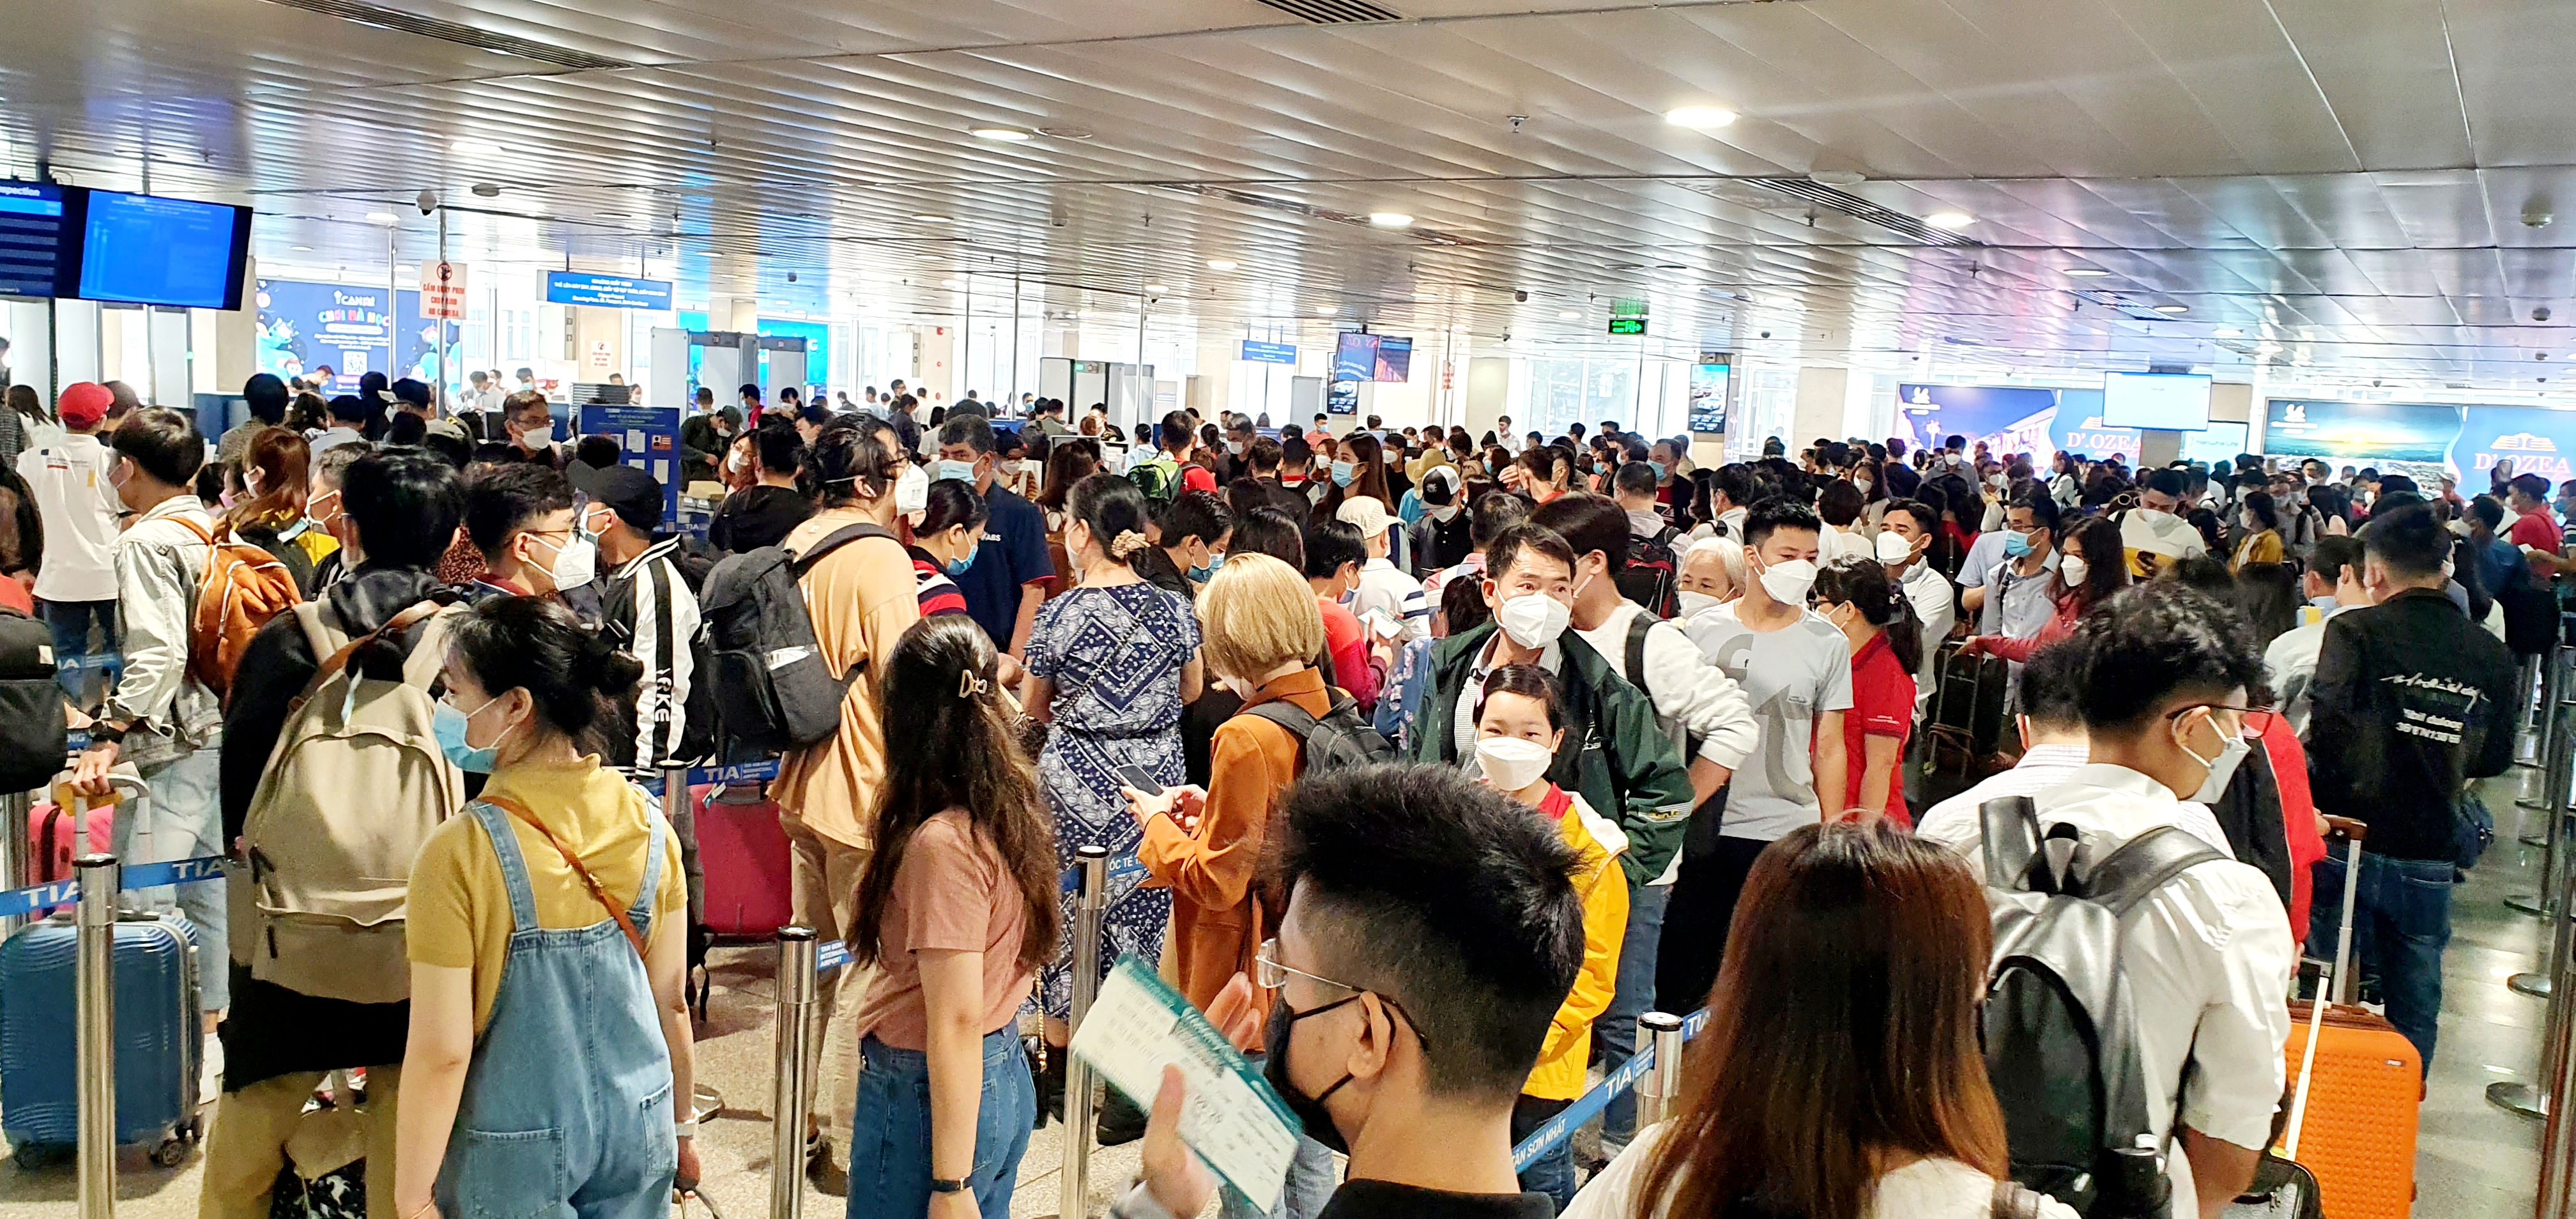 Ho Chi Minh City airport crowded with passengers ahead of Tet